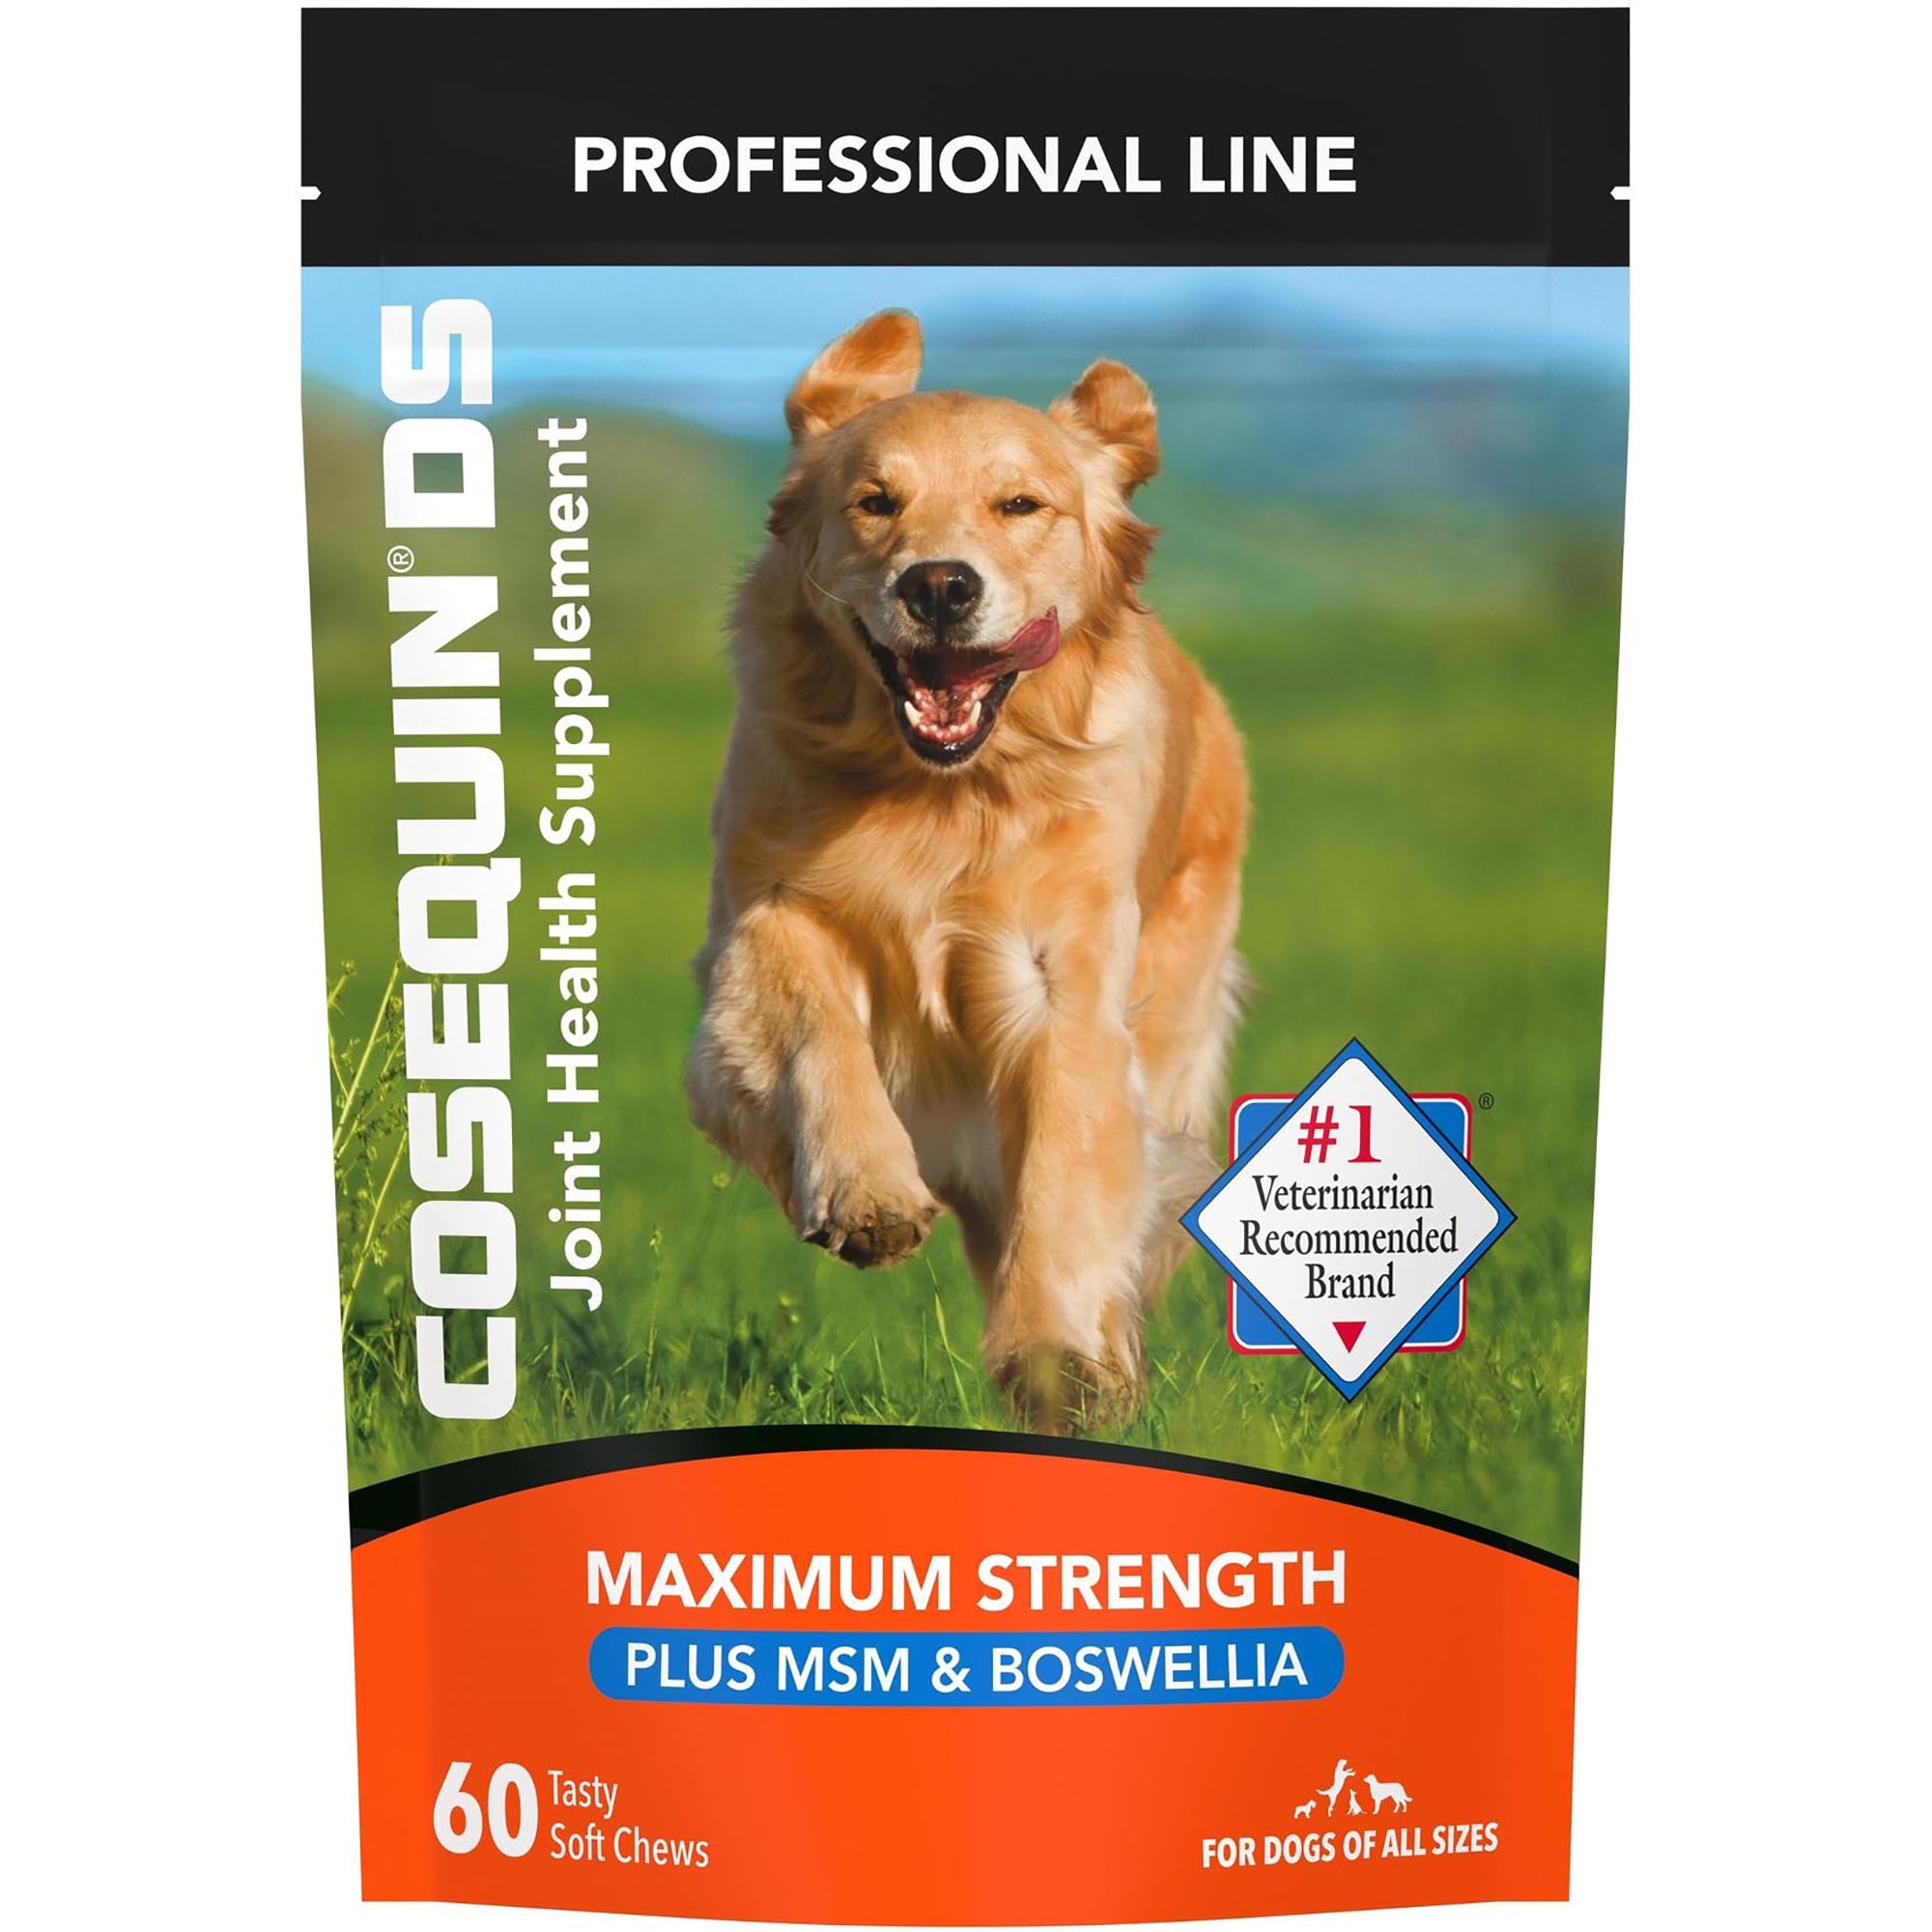 NUTRAMAX COSEQUIN DS Plus MSM Professional Line for Dogs, Count of 60